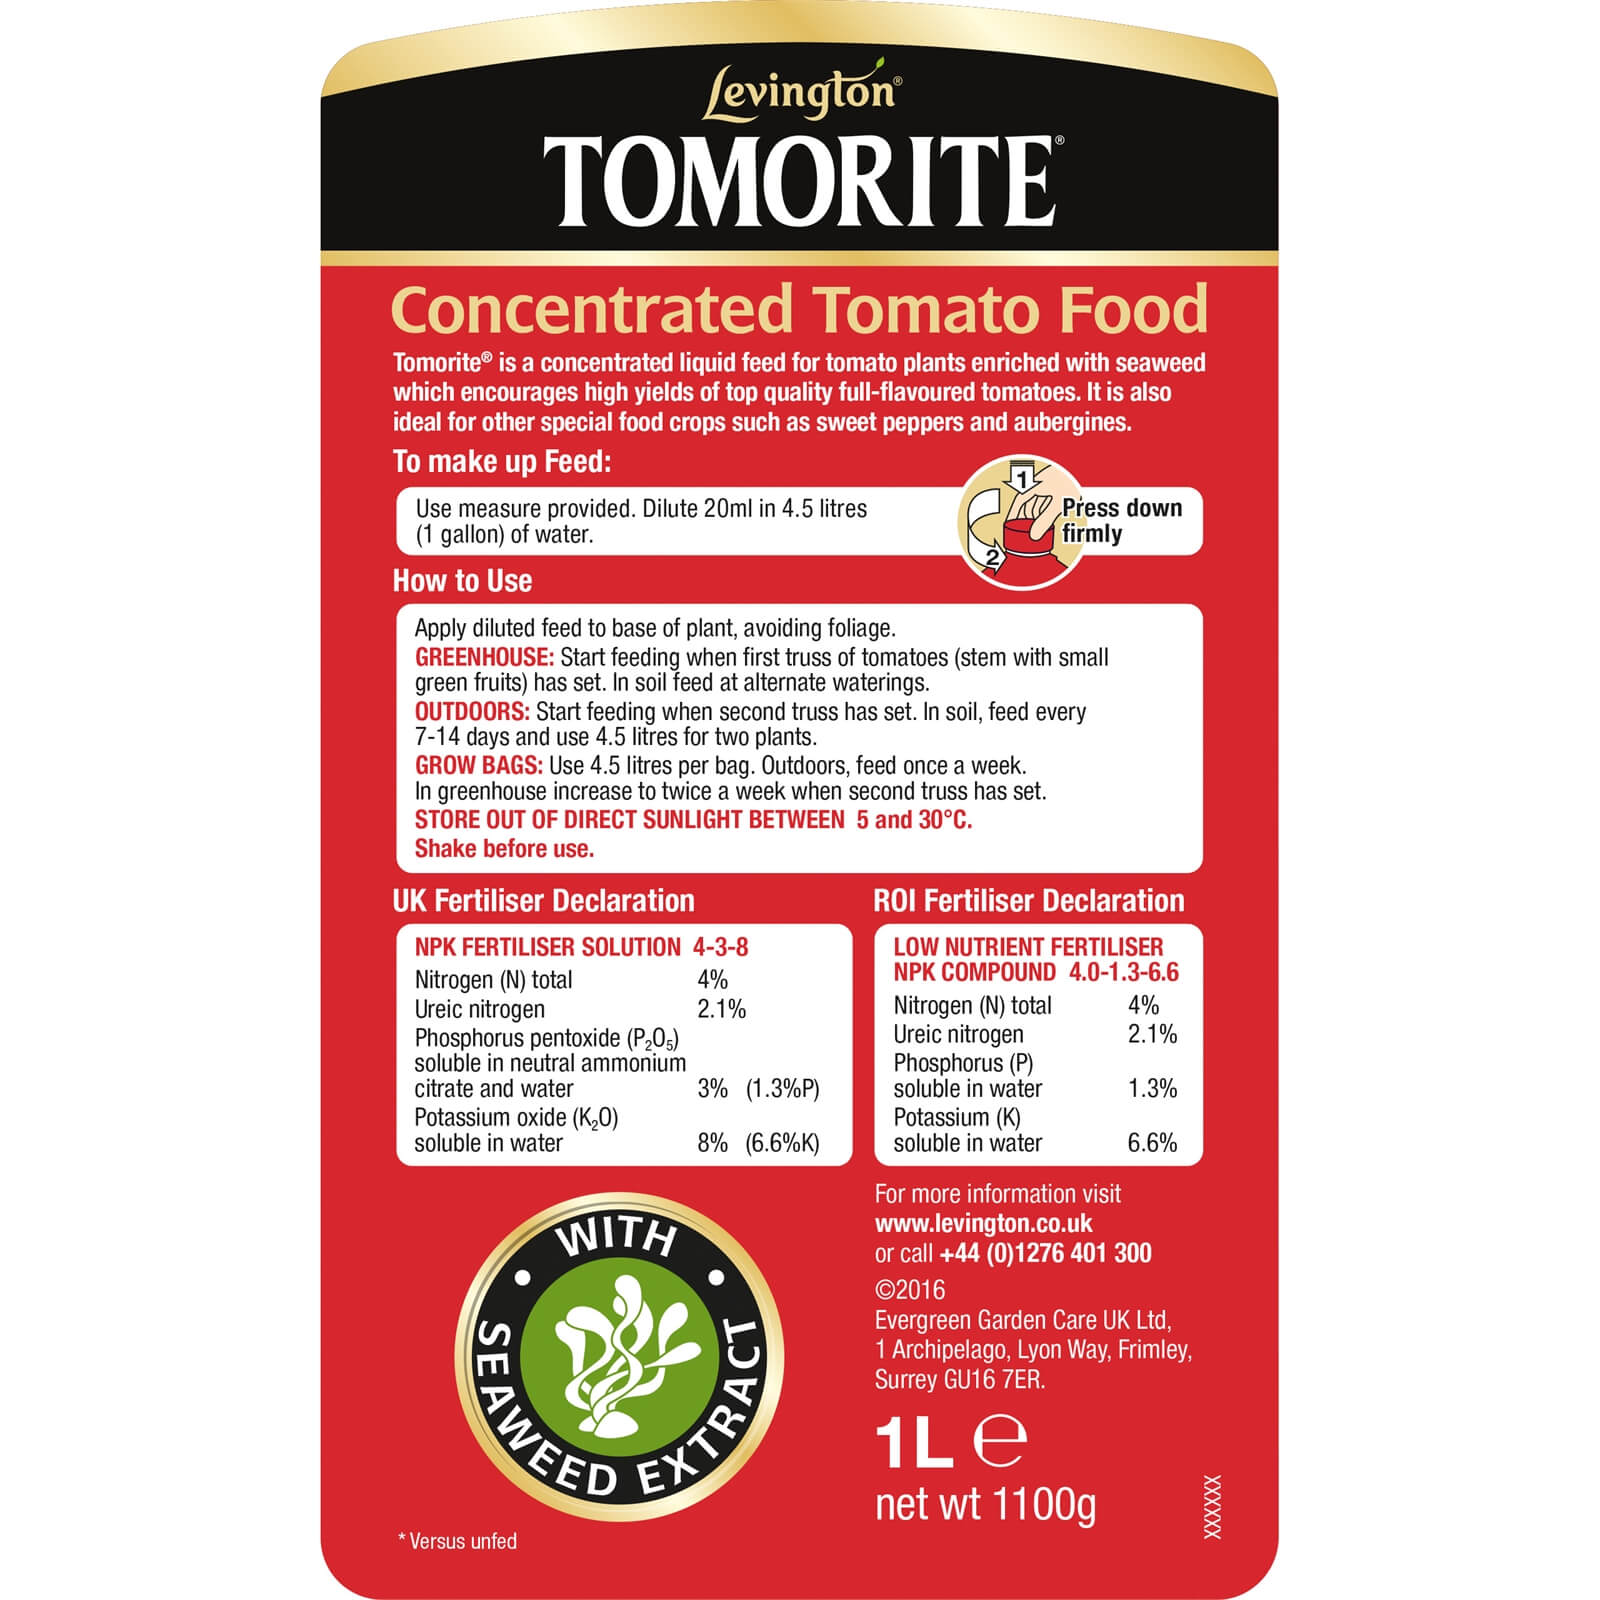 Levington Tomorite Concentrated Tomato Plant Food With Seaweed Extract - 1L